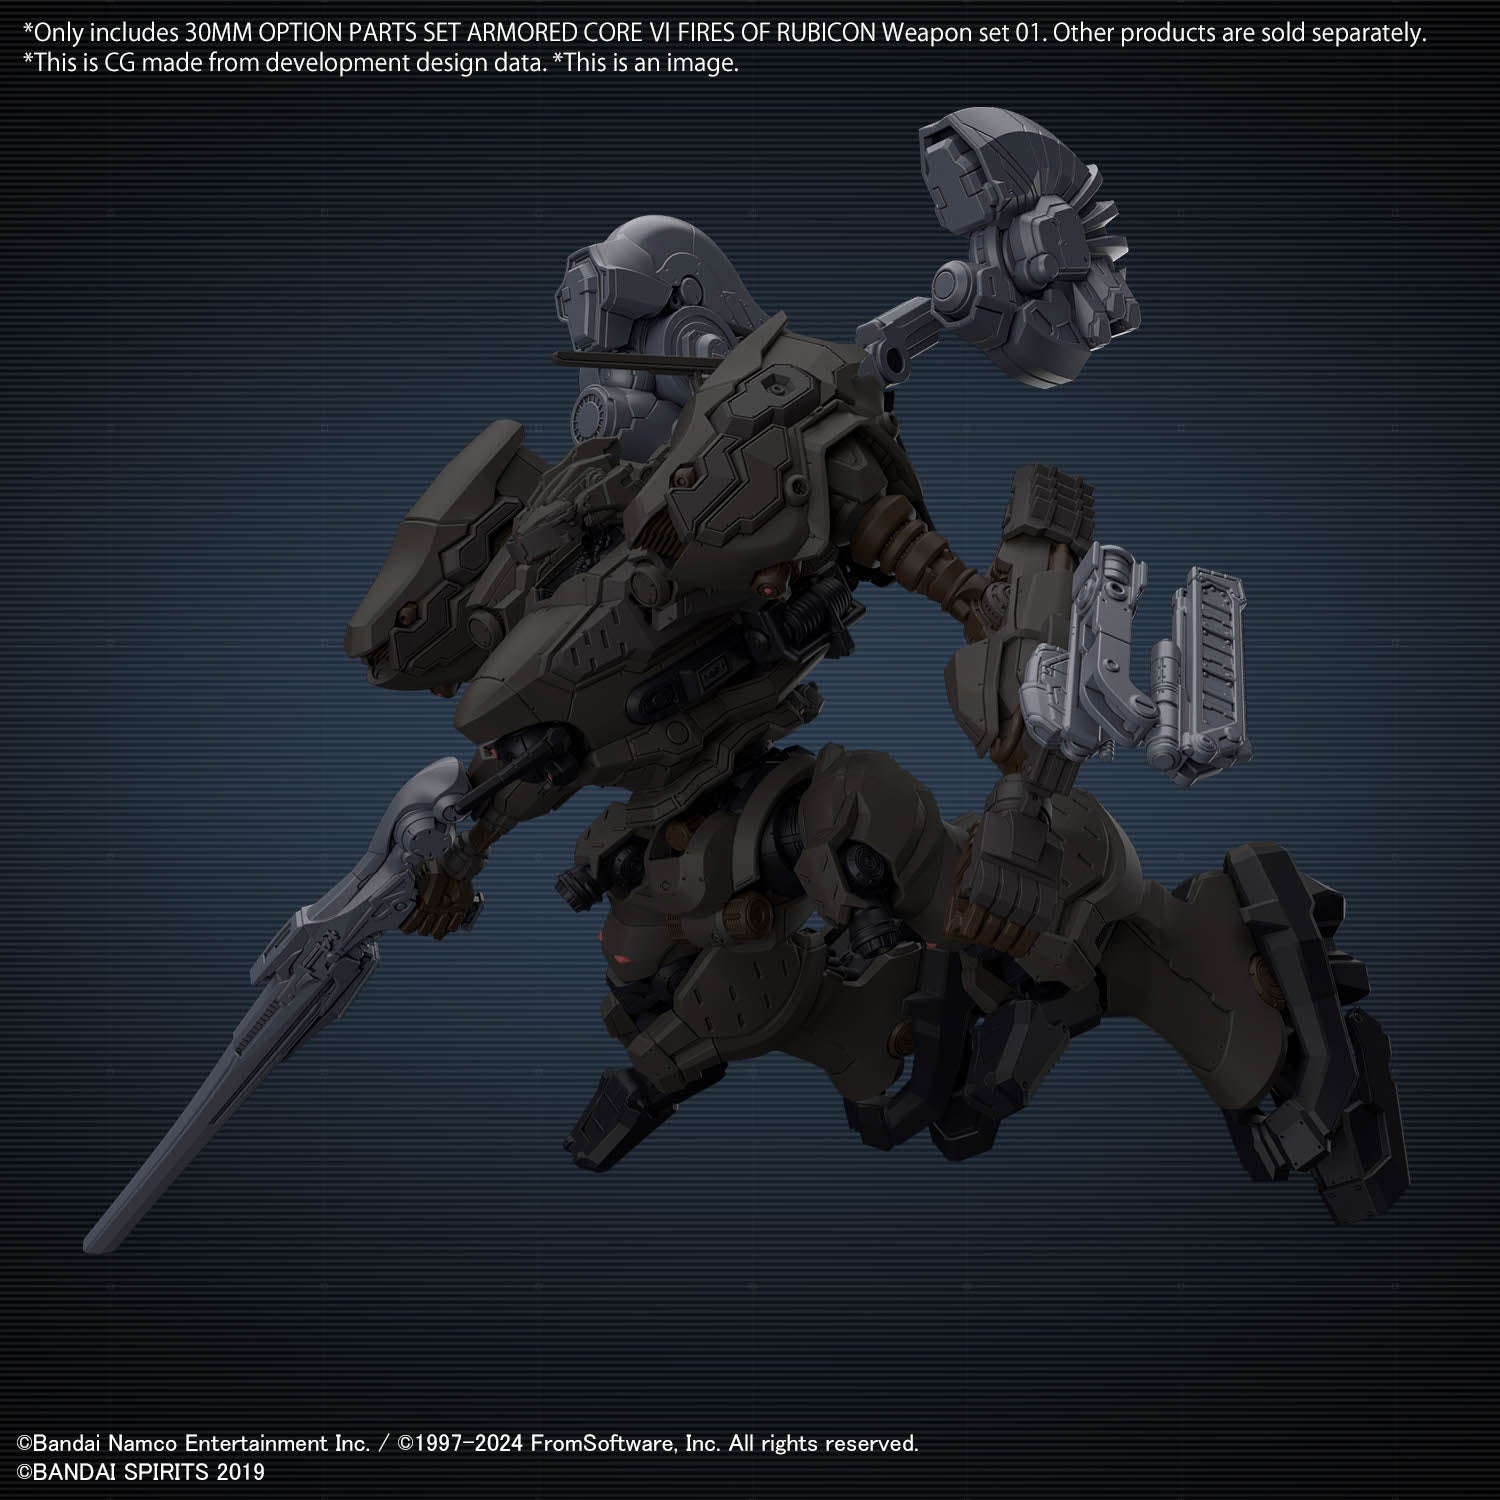 30mm Option Parts Set Armored Core Ⅵ Fires of Rubicon Weapon Set 01